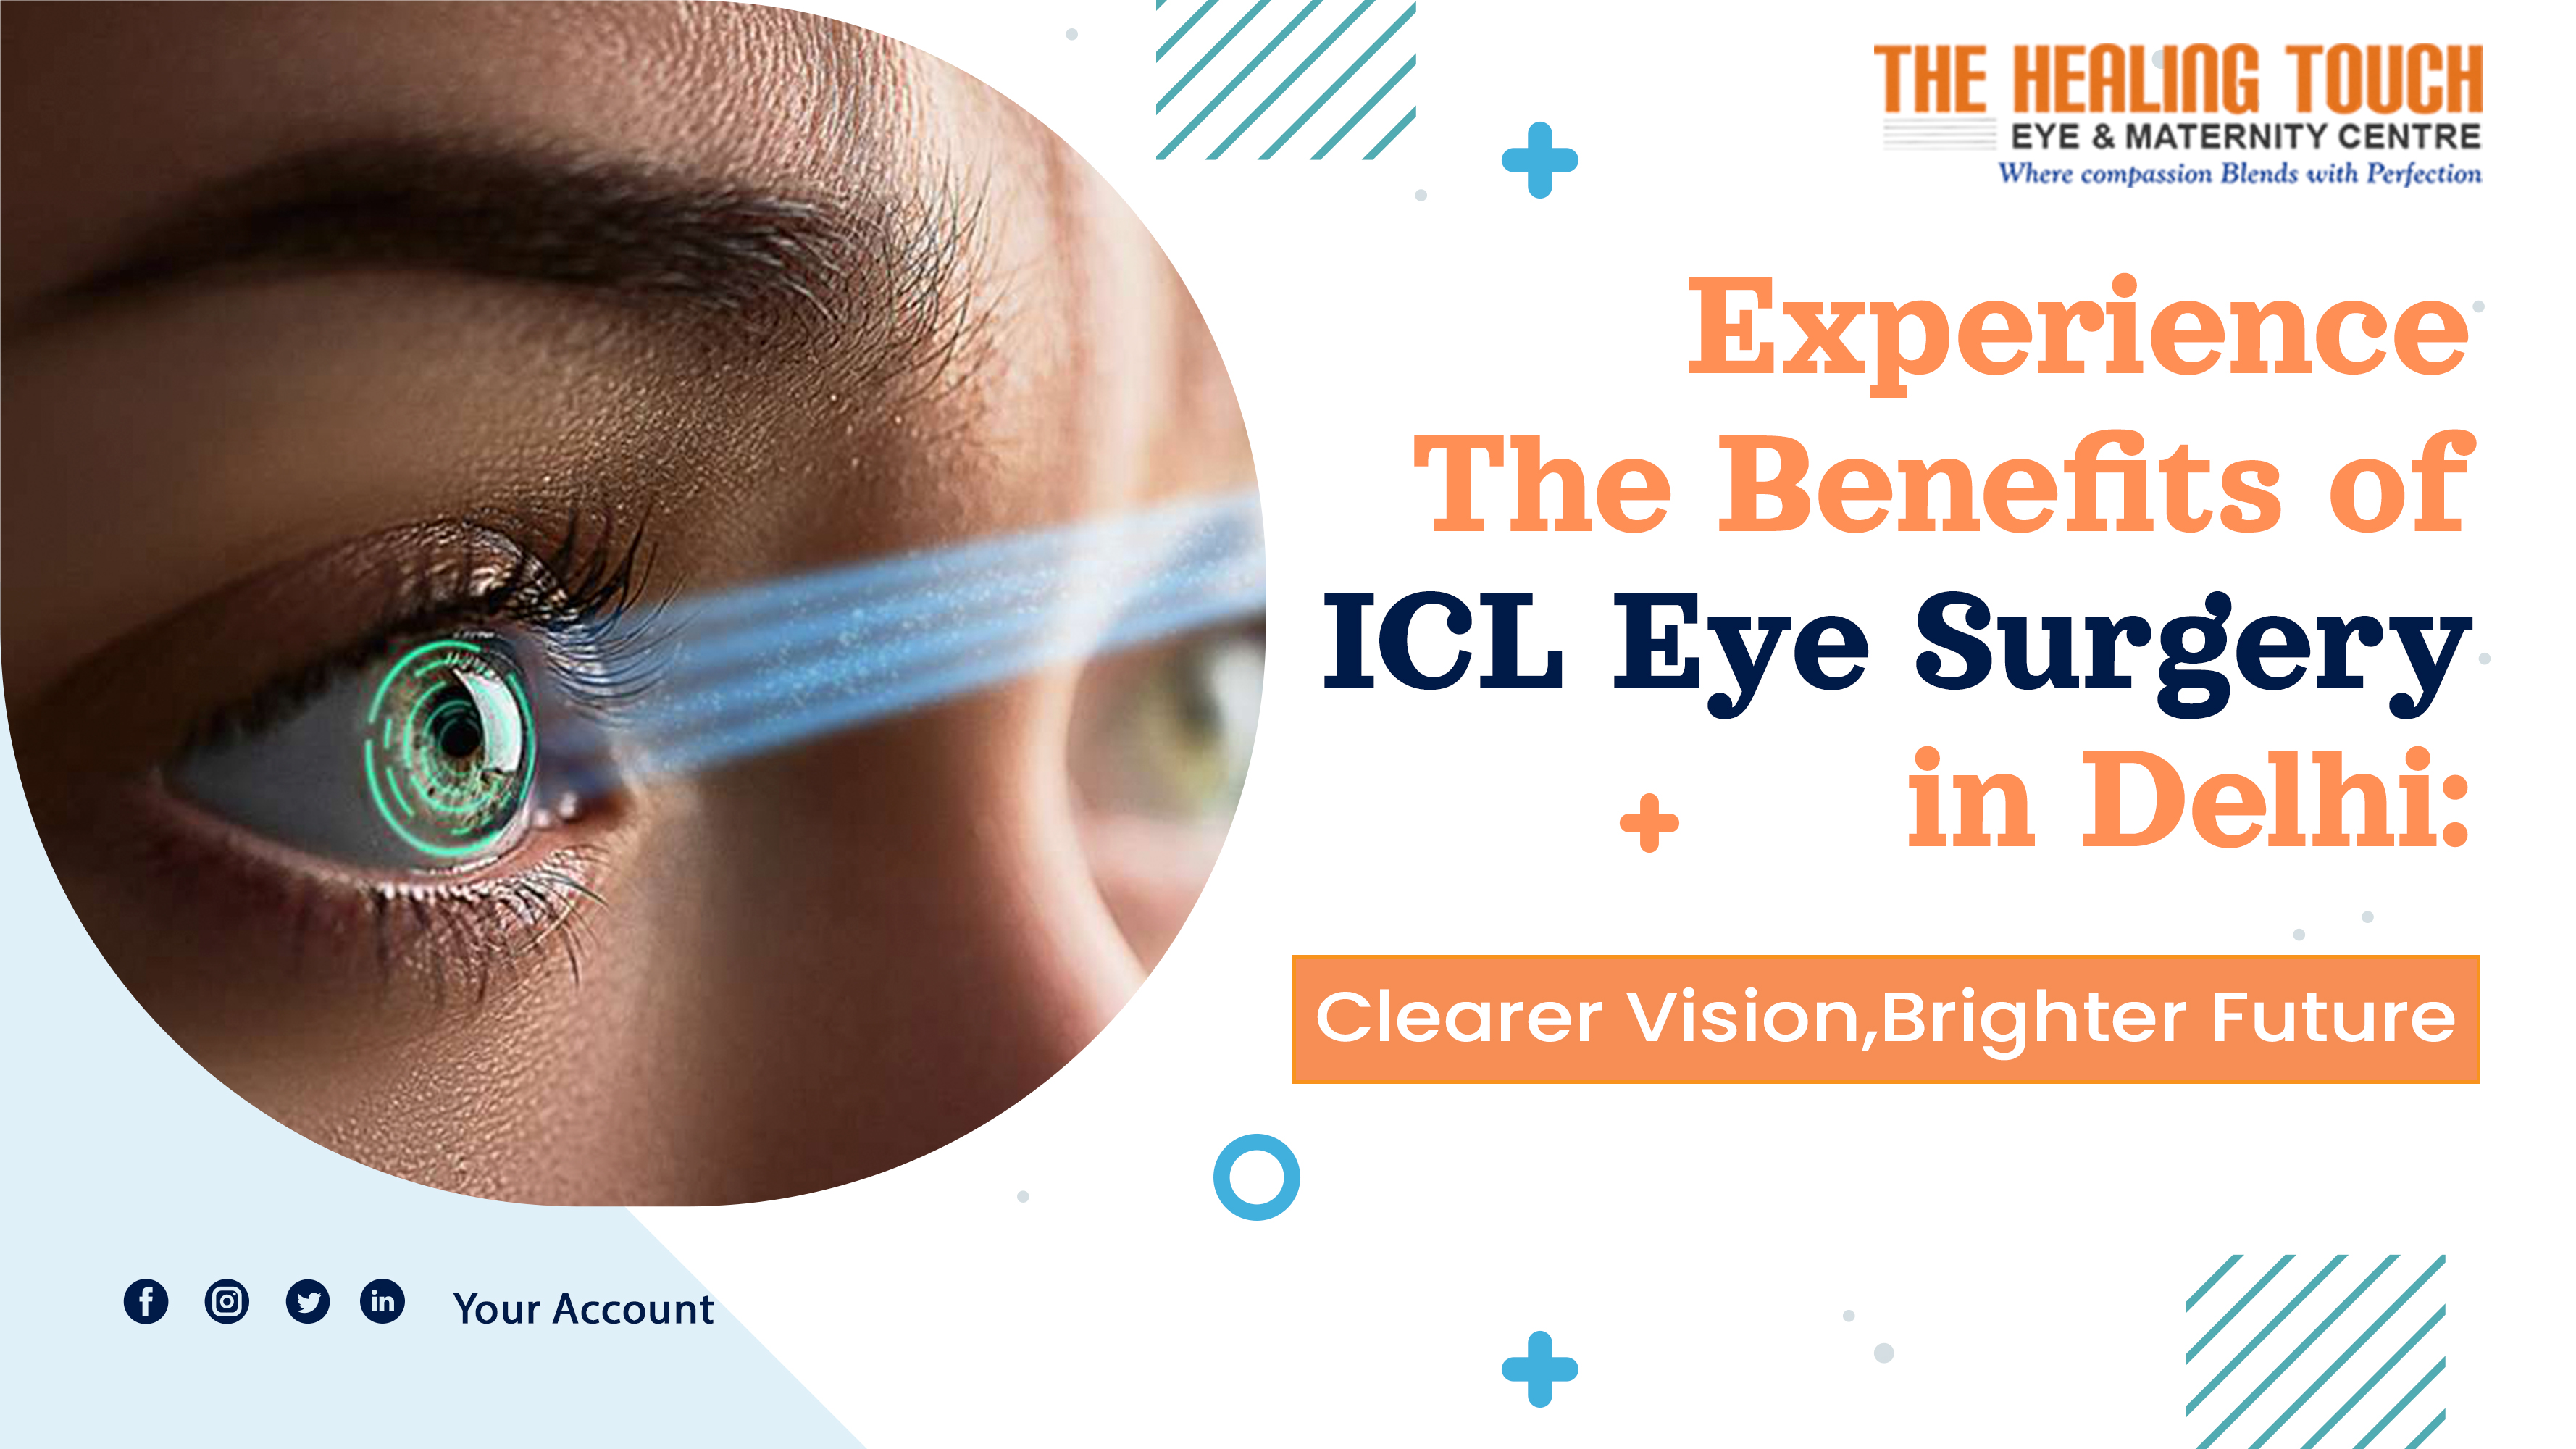 Experience the Benefits of ICL Eye Surgery in Delhi: Clearer Vision, Brighter Future